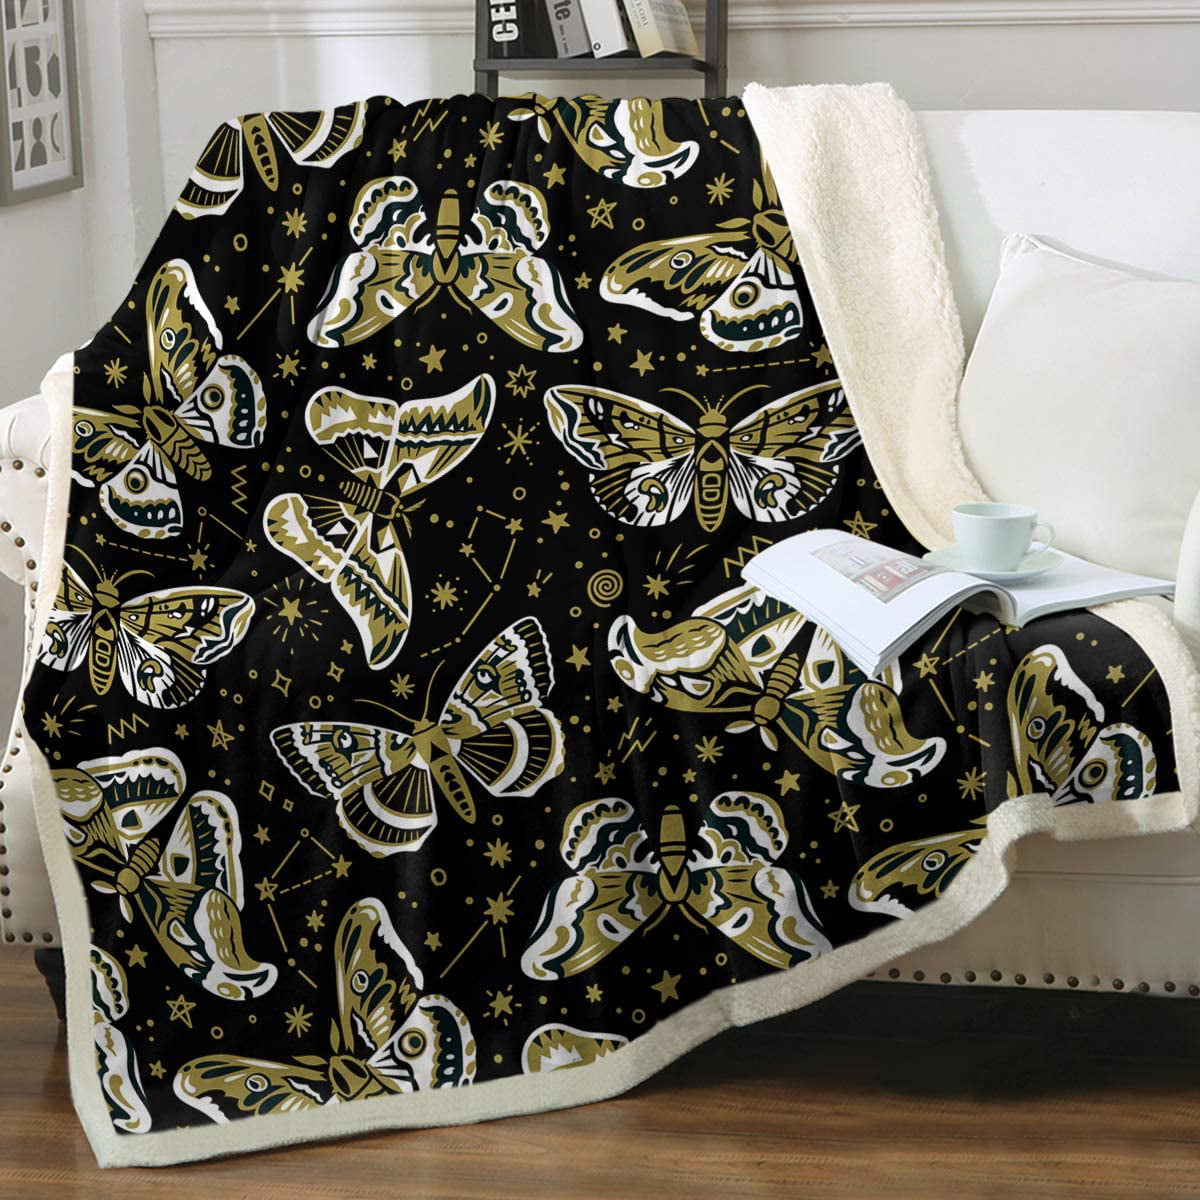 Monarch Butterfly Flannel Blanket,Soft Bedding Fleece Throw Couch Cover Decorative Blanket for Home Bed Sofa & Dorm 80x60 